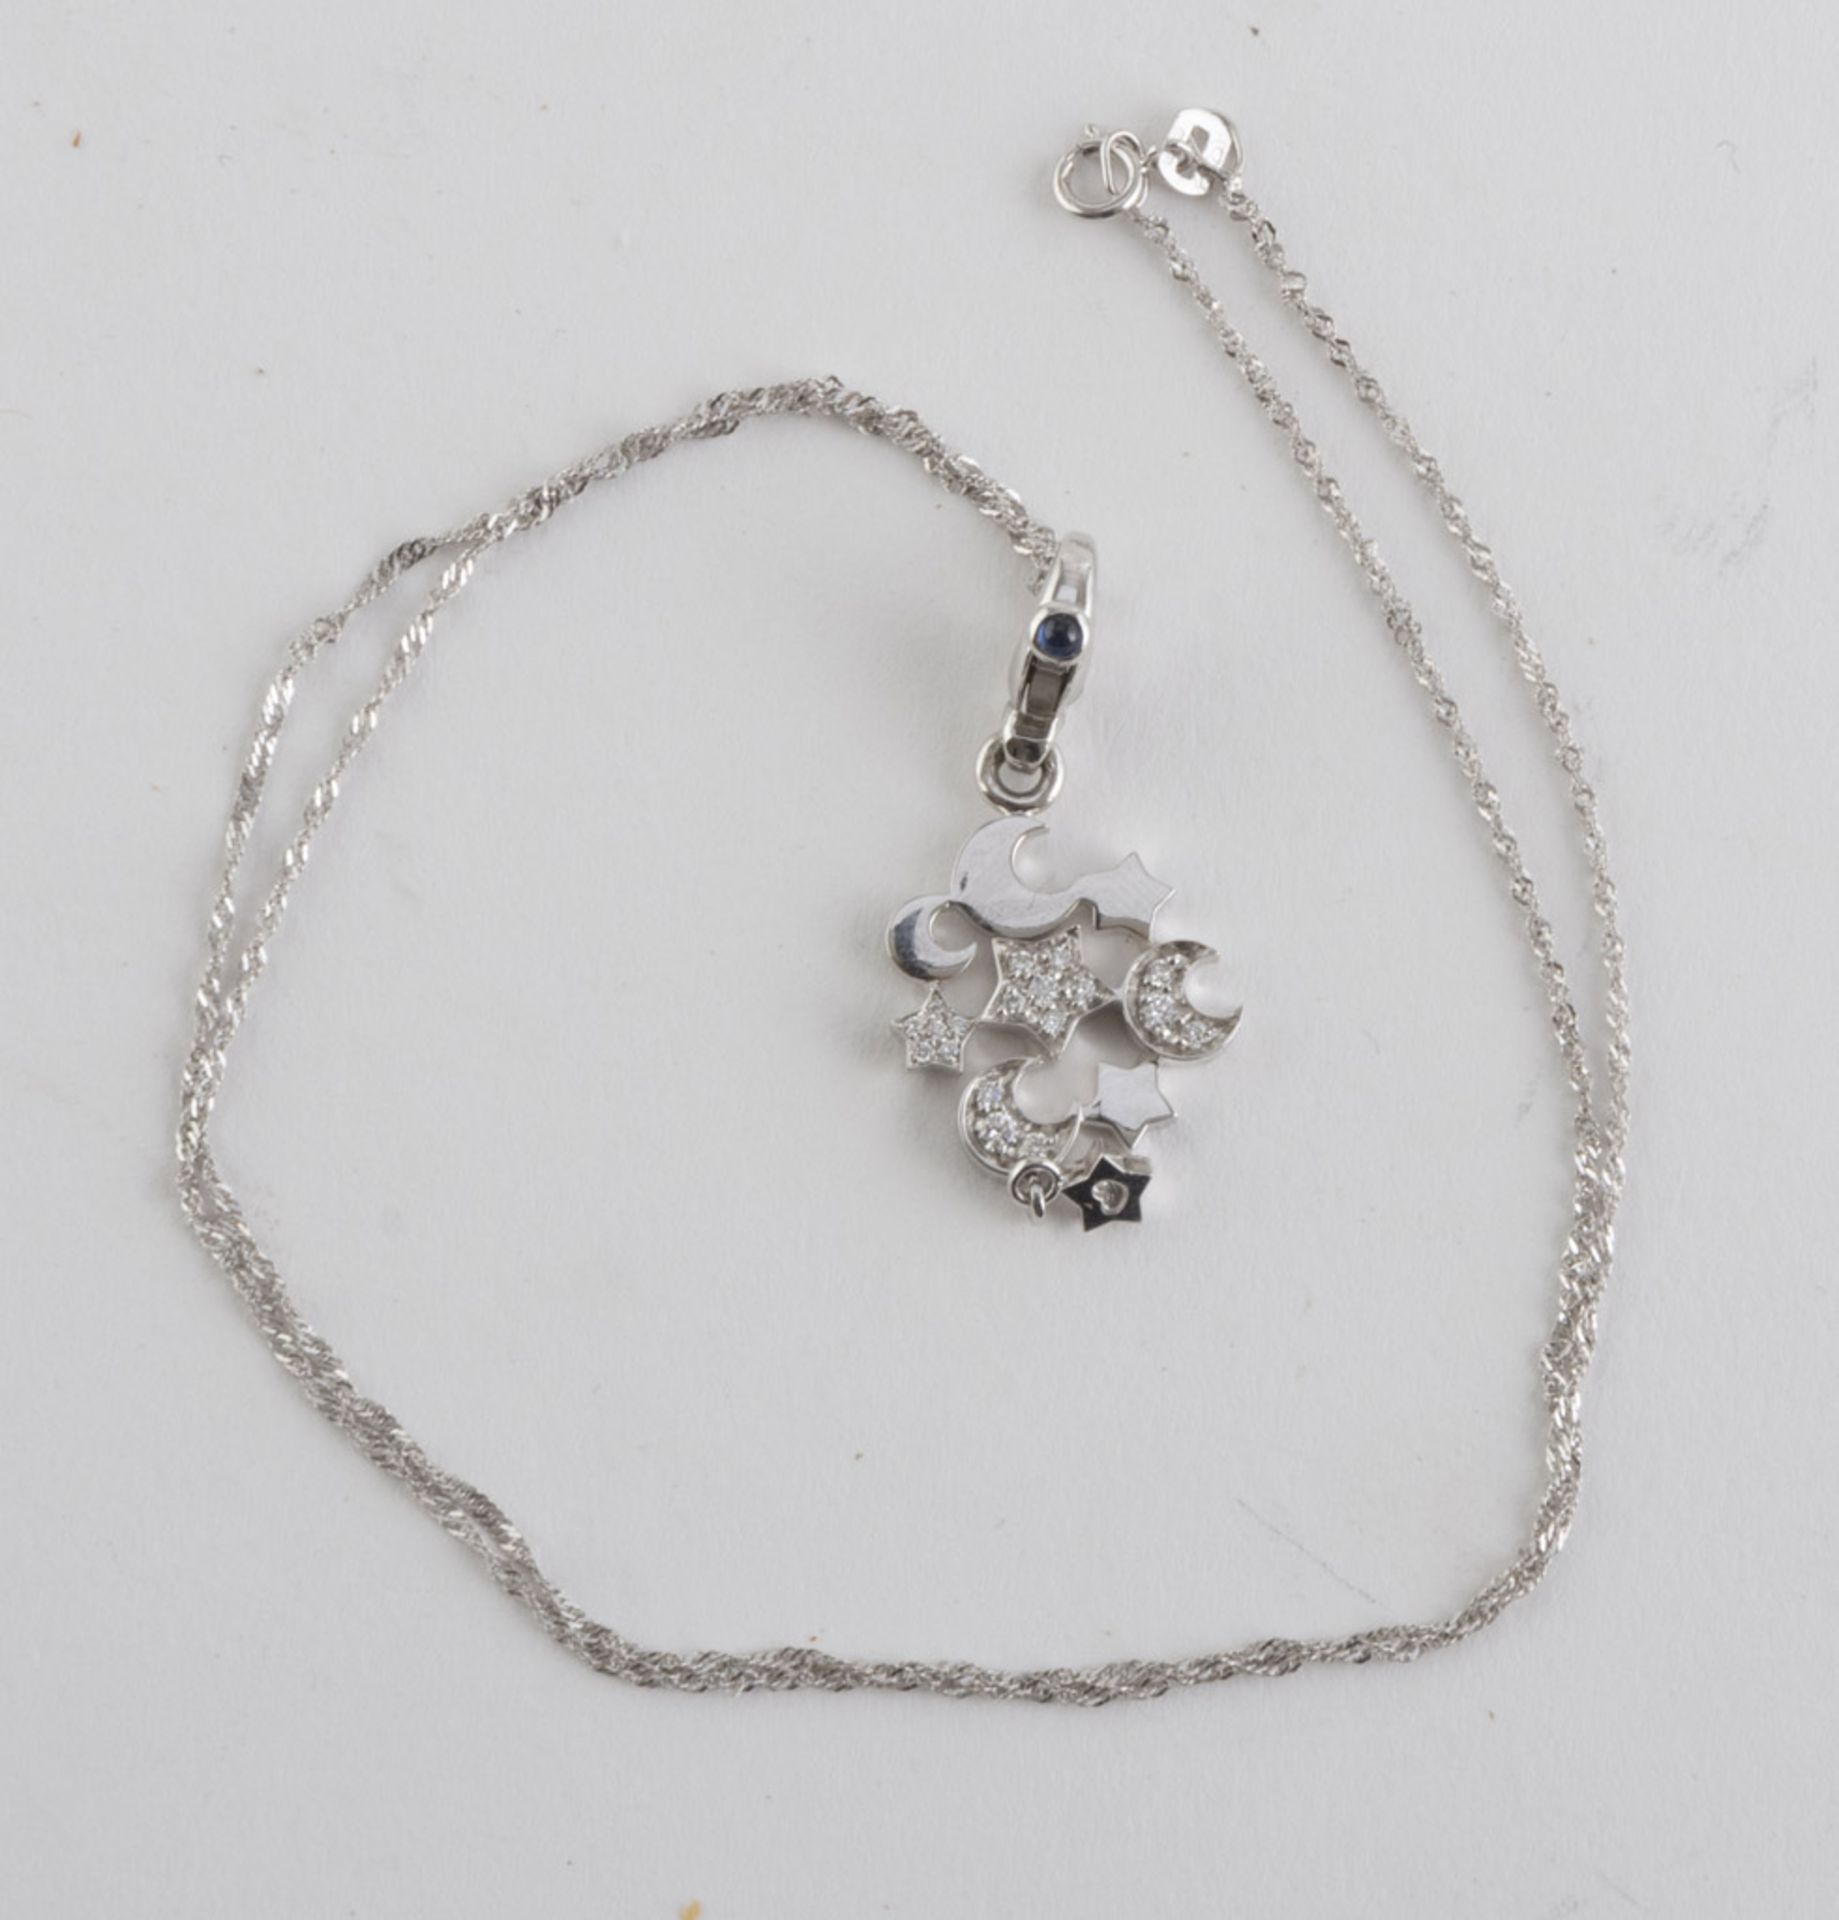 CHOKER PASQUALE BRUNI in white gold 18 kts., pendant with elements shaped to starlets, studded of